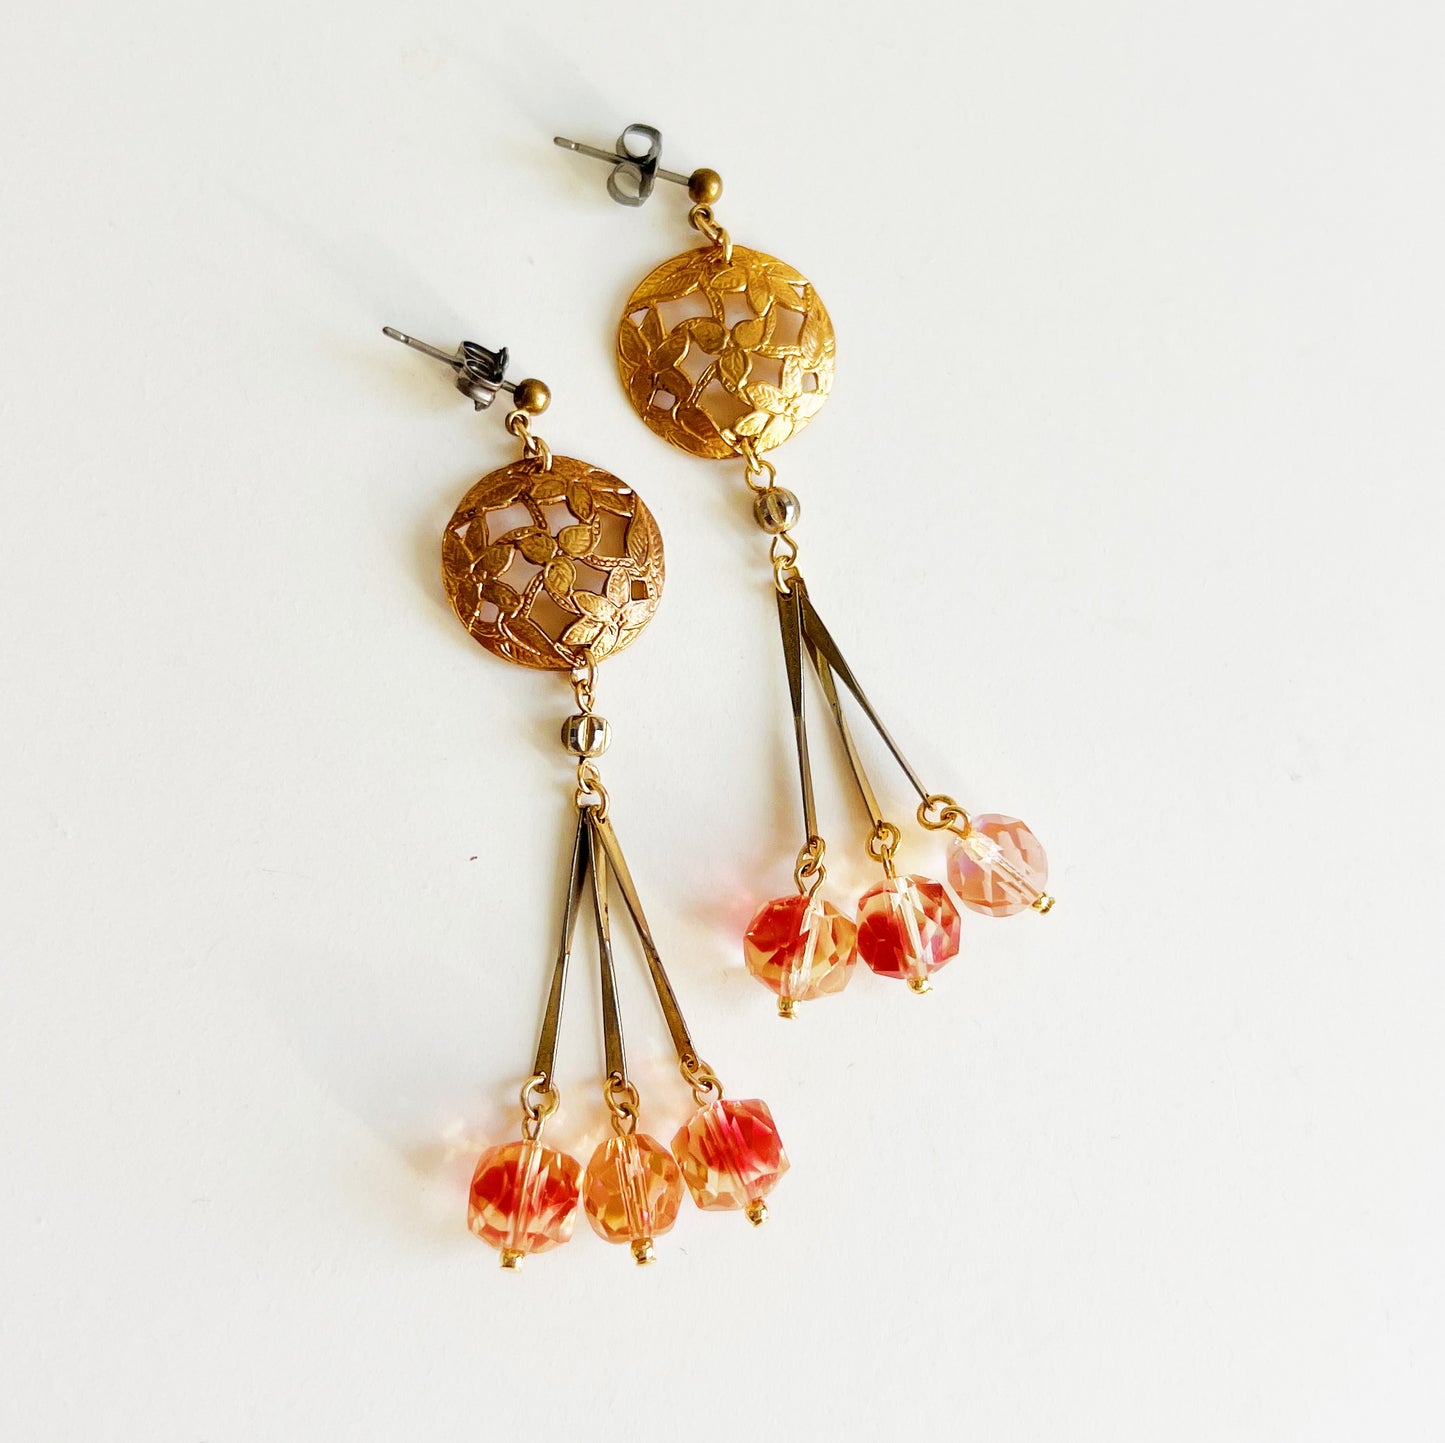 Red currant earrings